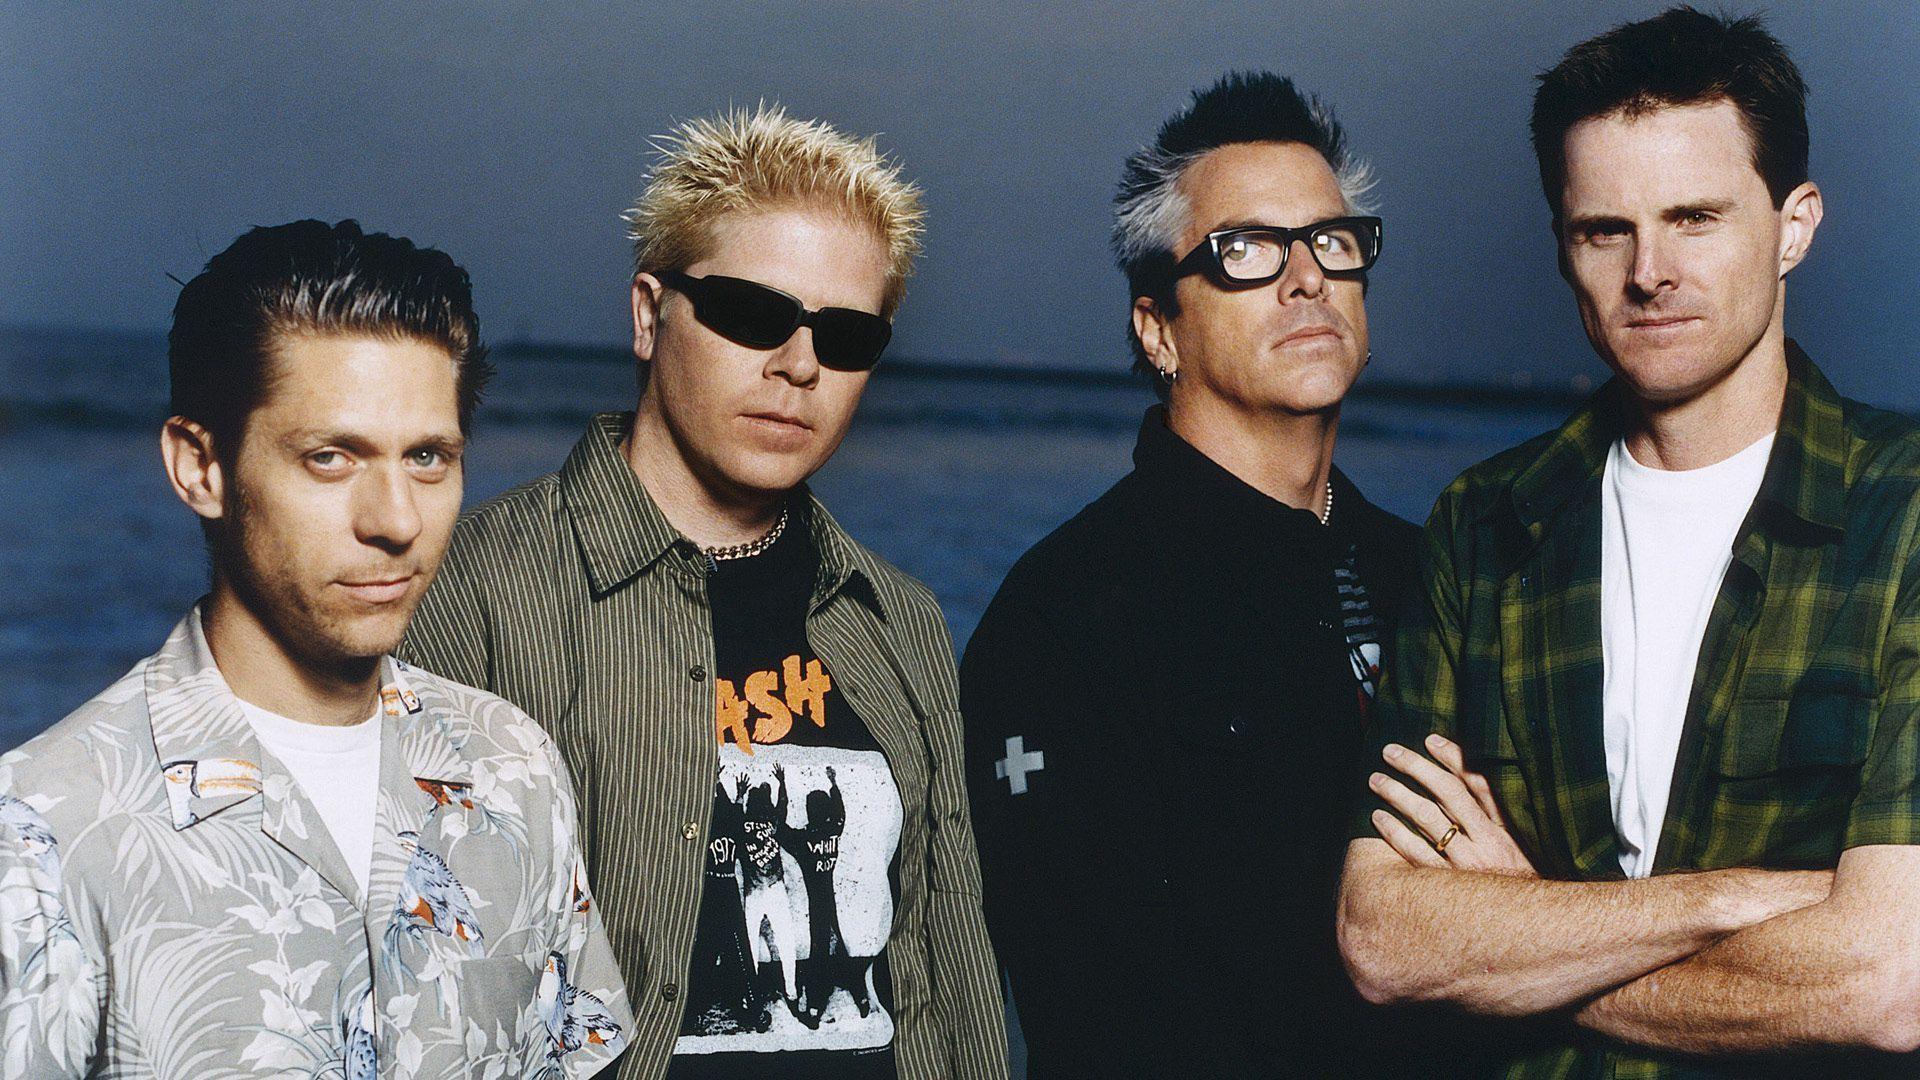 The Offspring Wallpaper Image Photo Picture Background